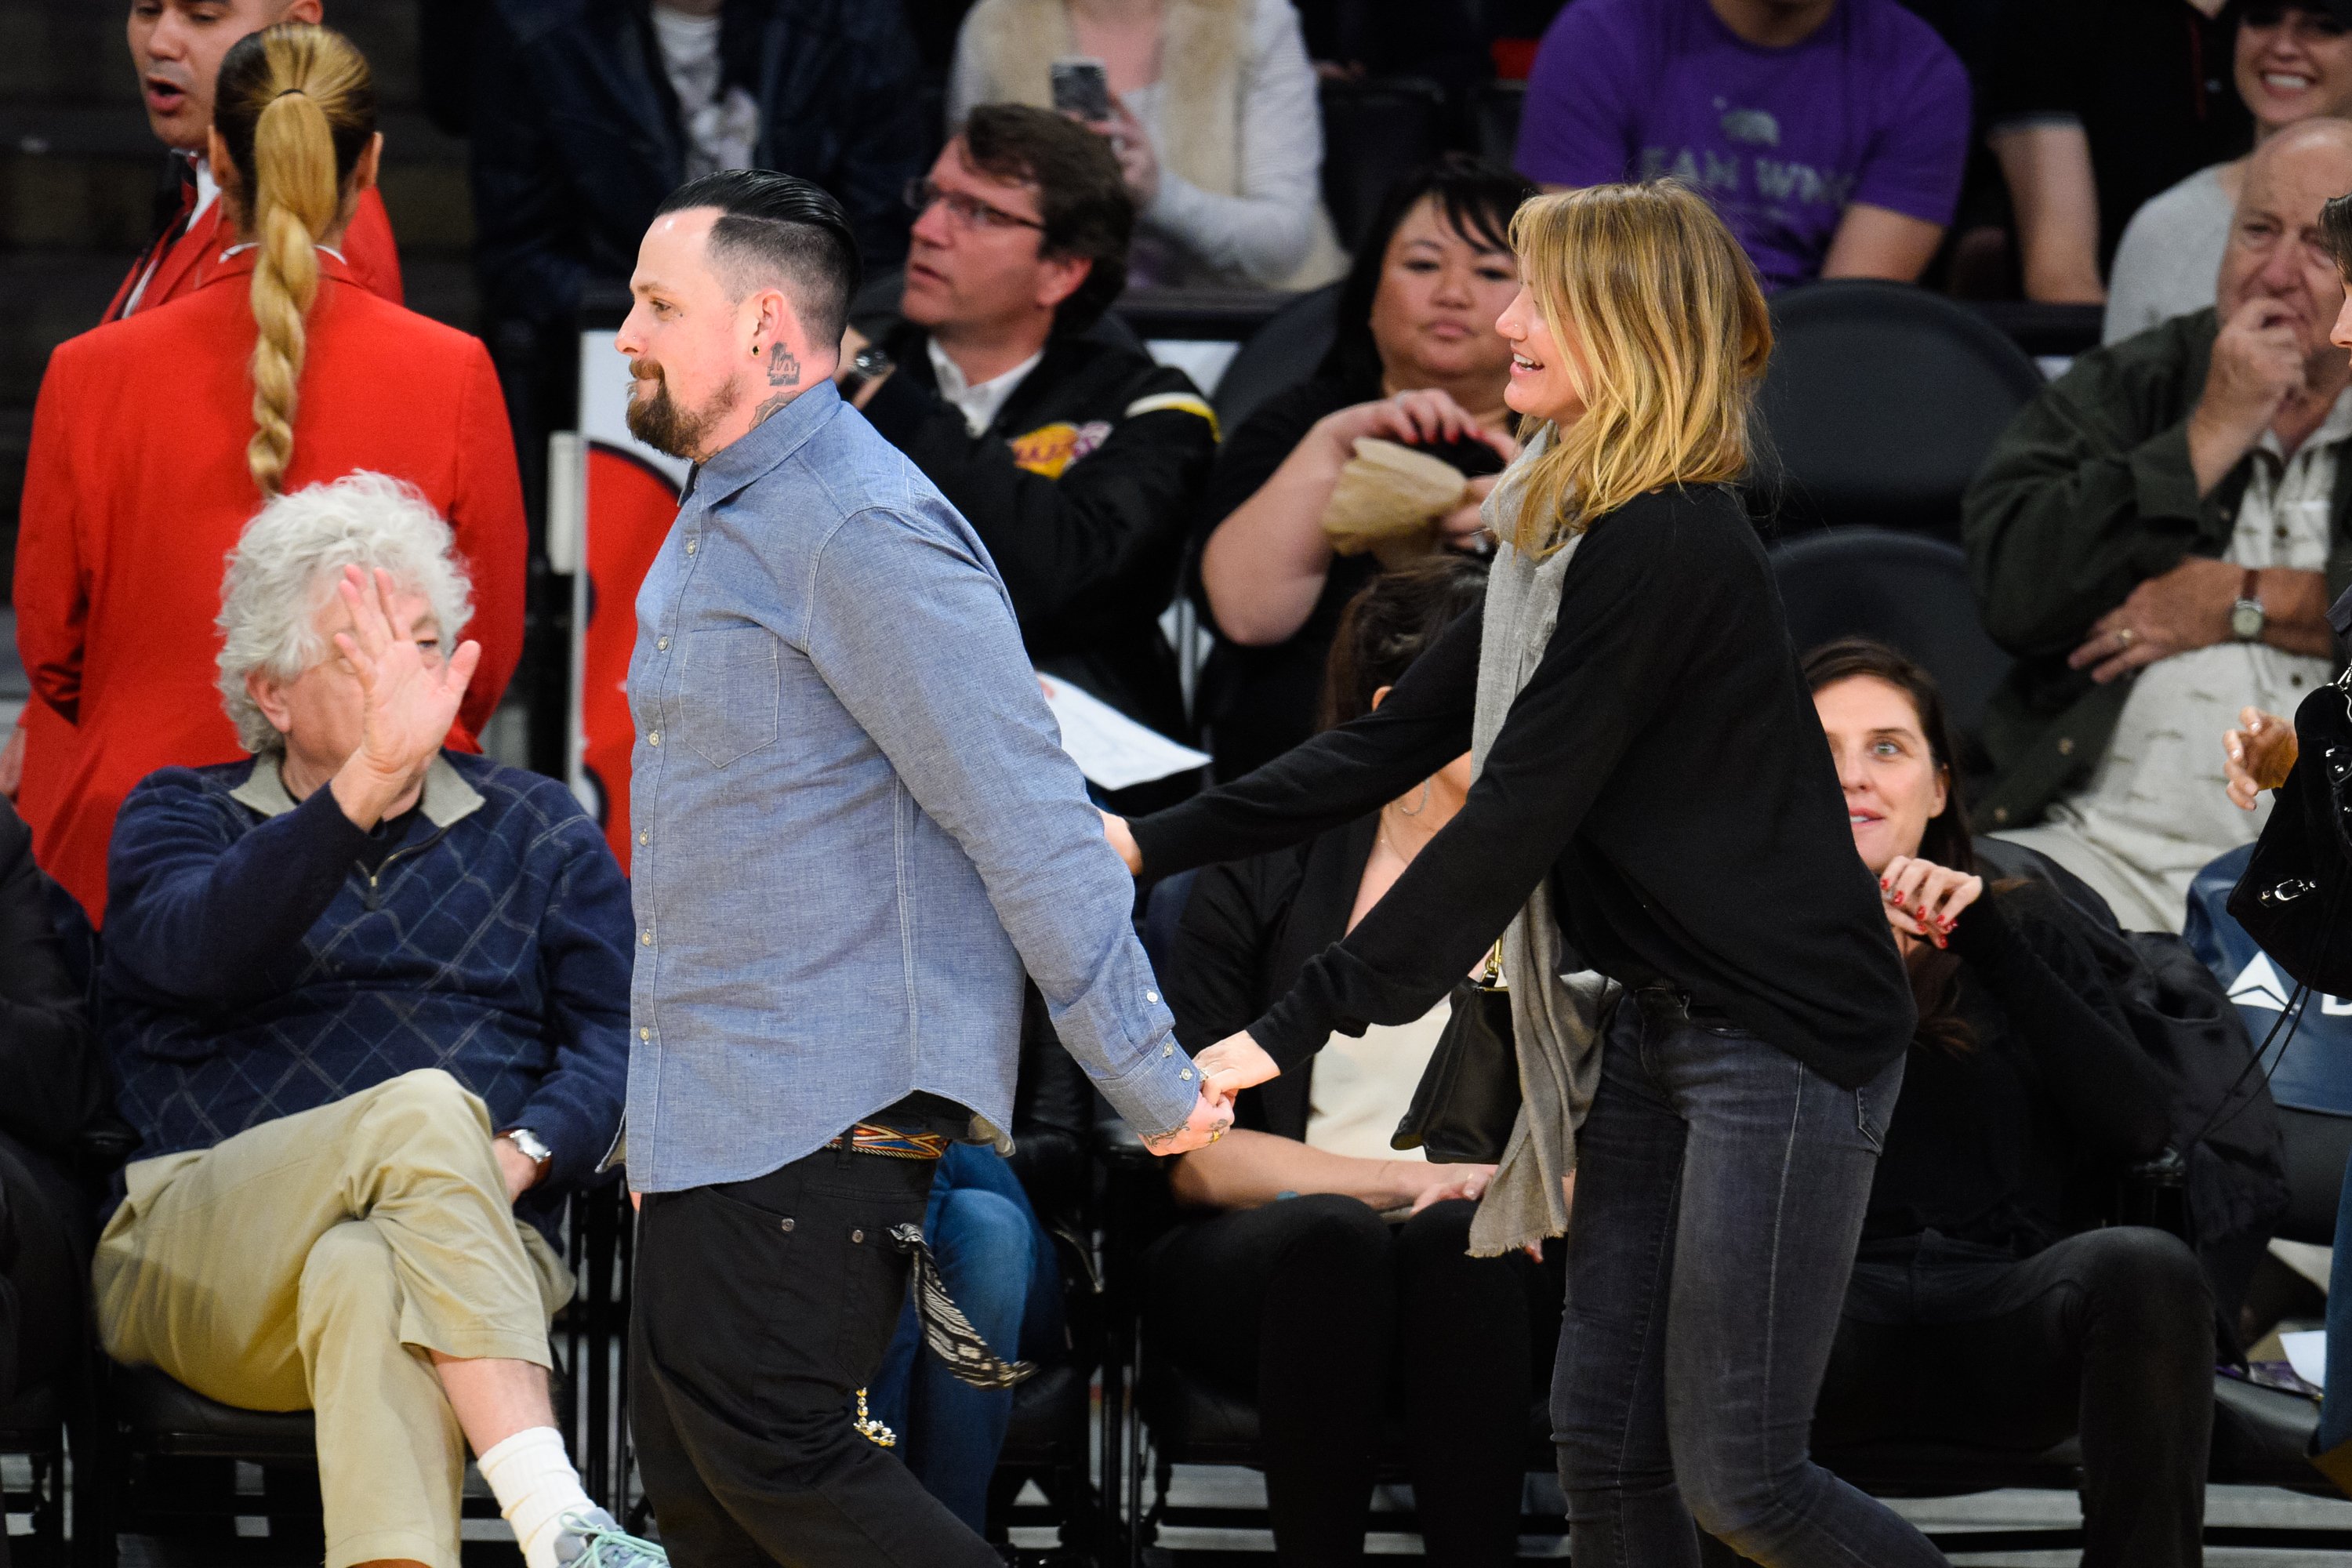 Benji Madden and Cameron Diaz leaving a basketball game on January 27, 2015 | Source: Getty Images